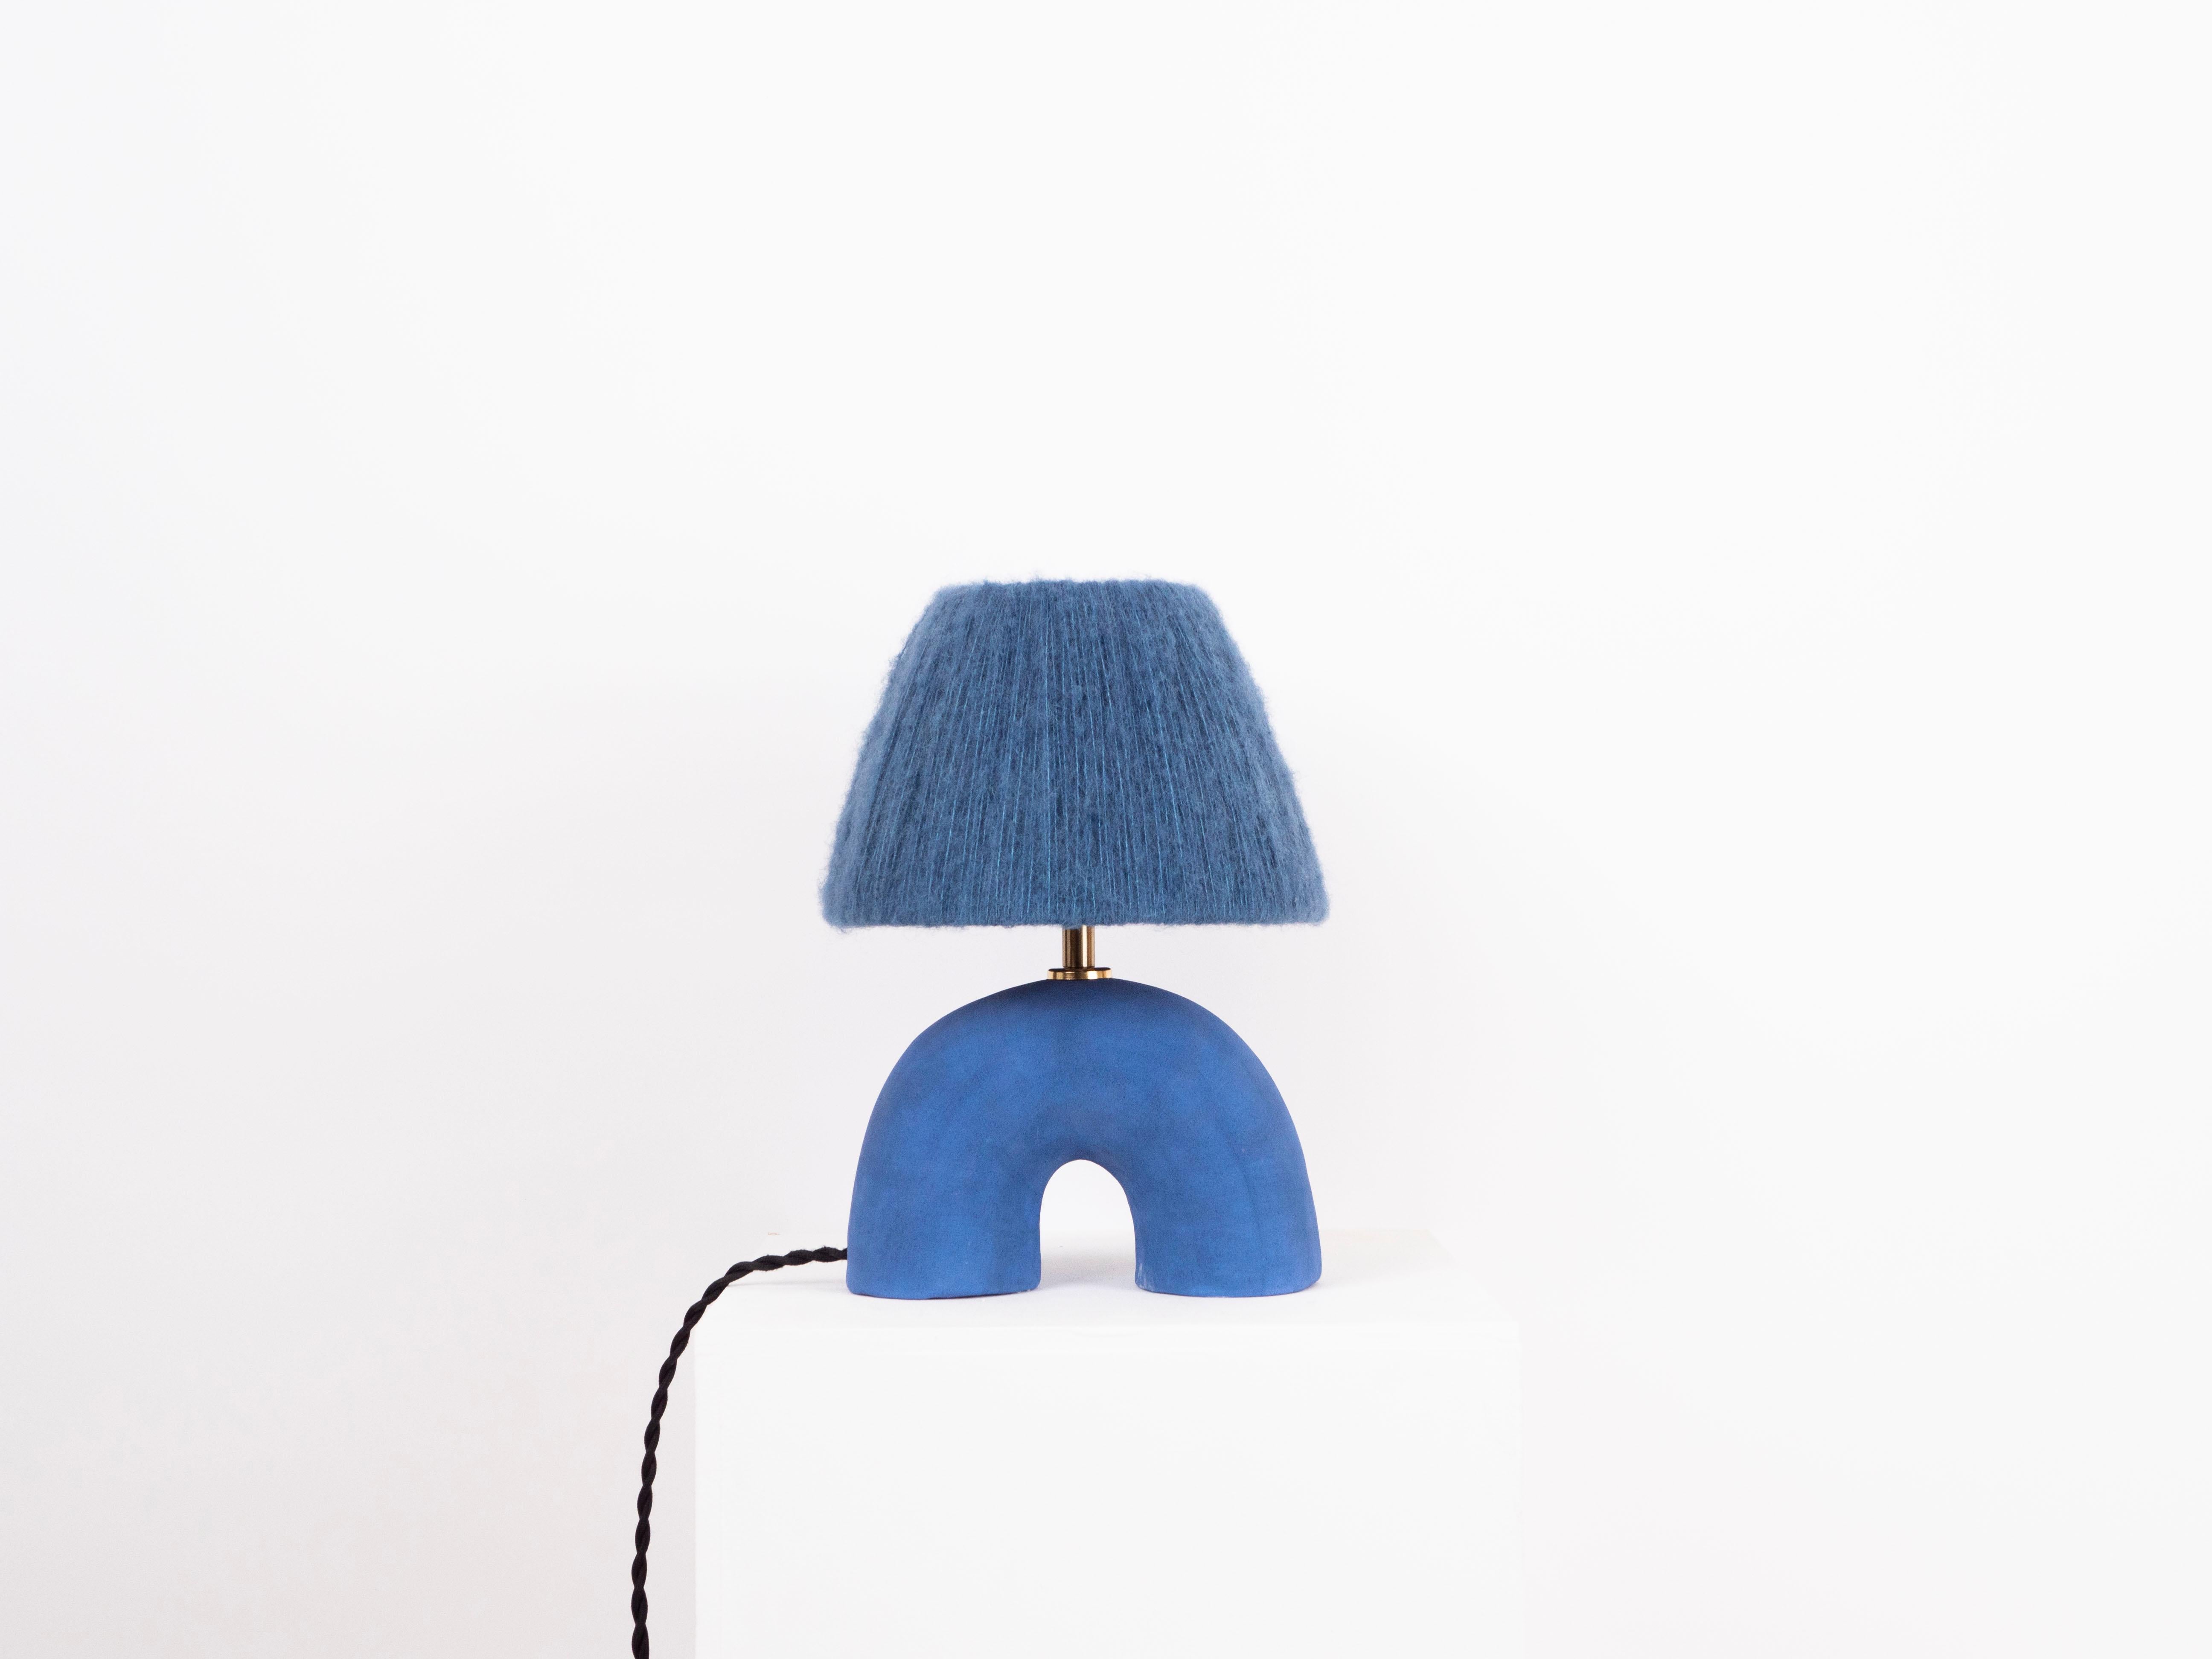 Blue matte finish lamp with mohair shade

Estimated processing time is 2 weeks from order confirmation

Pictured with a Mini Globe LED E27 Bulb. Bulb not included

To pair this base with a shade in an alternative colour or Material, click the